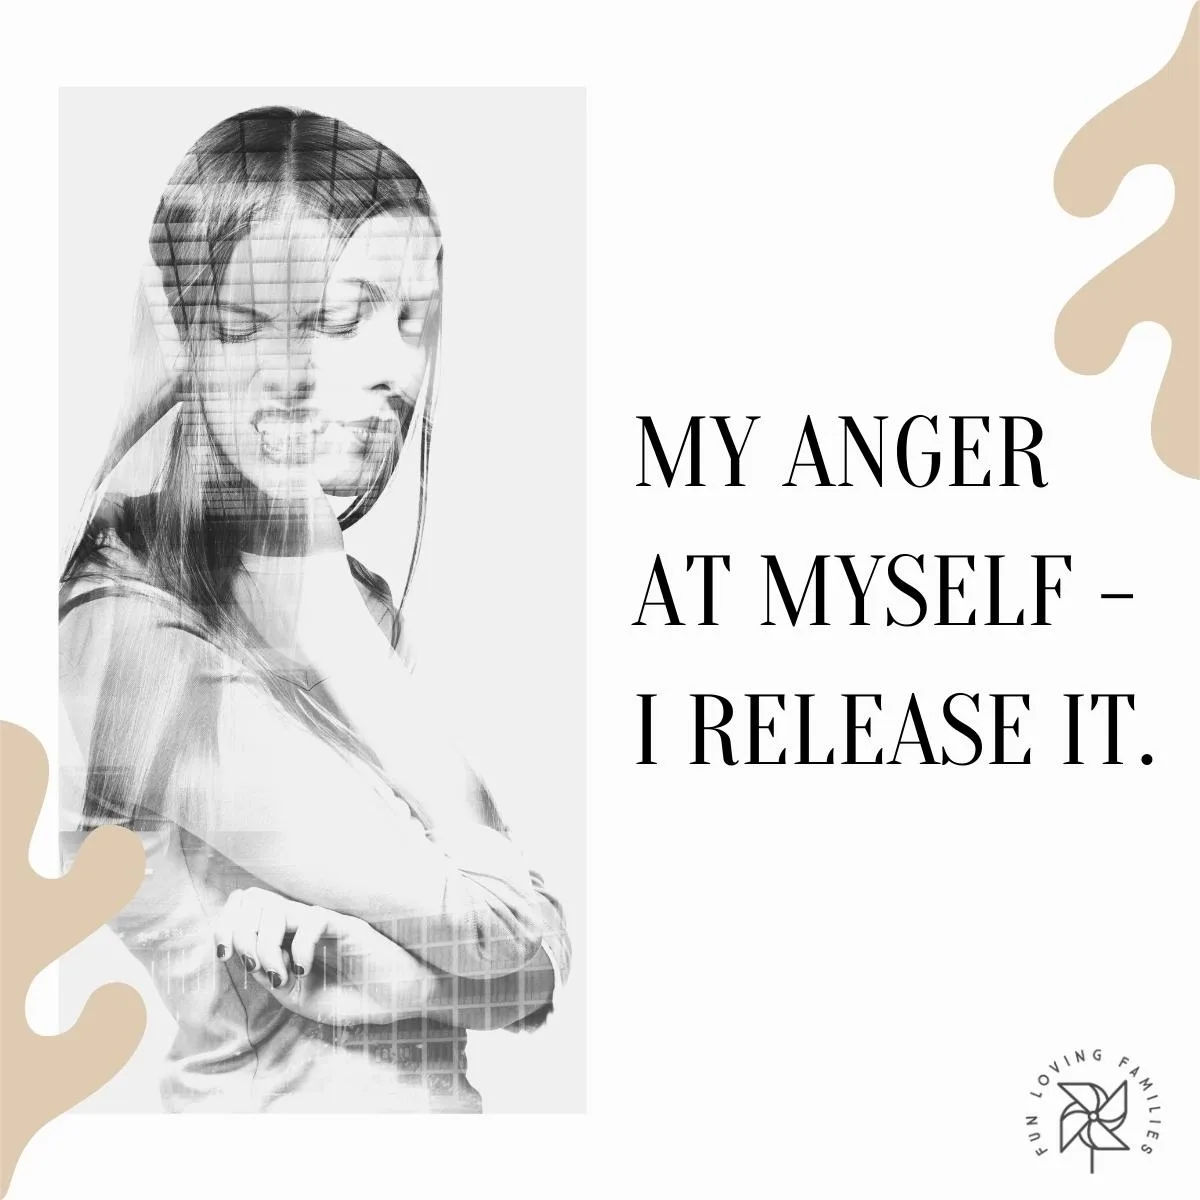 My anger at myself - I release it affirmation image